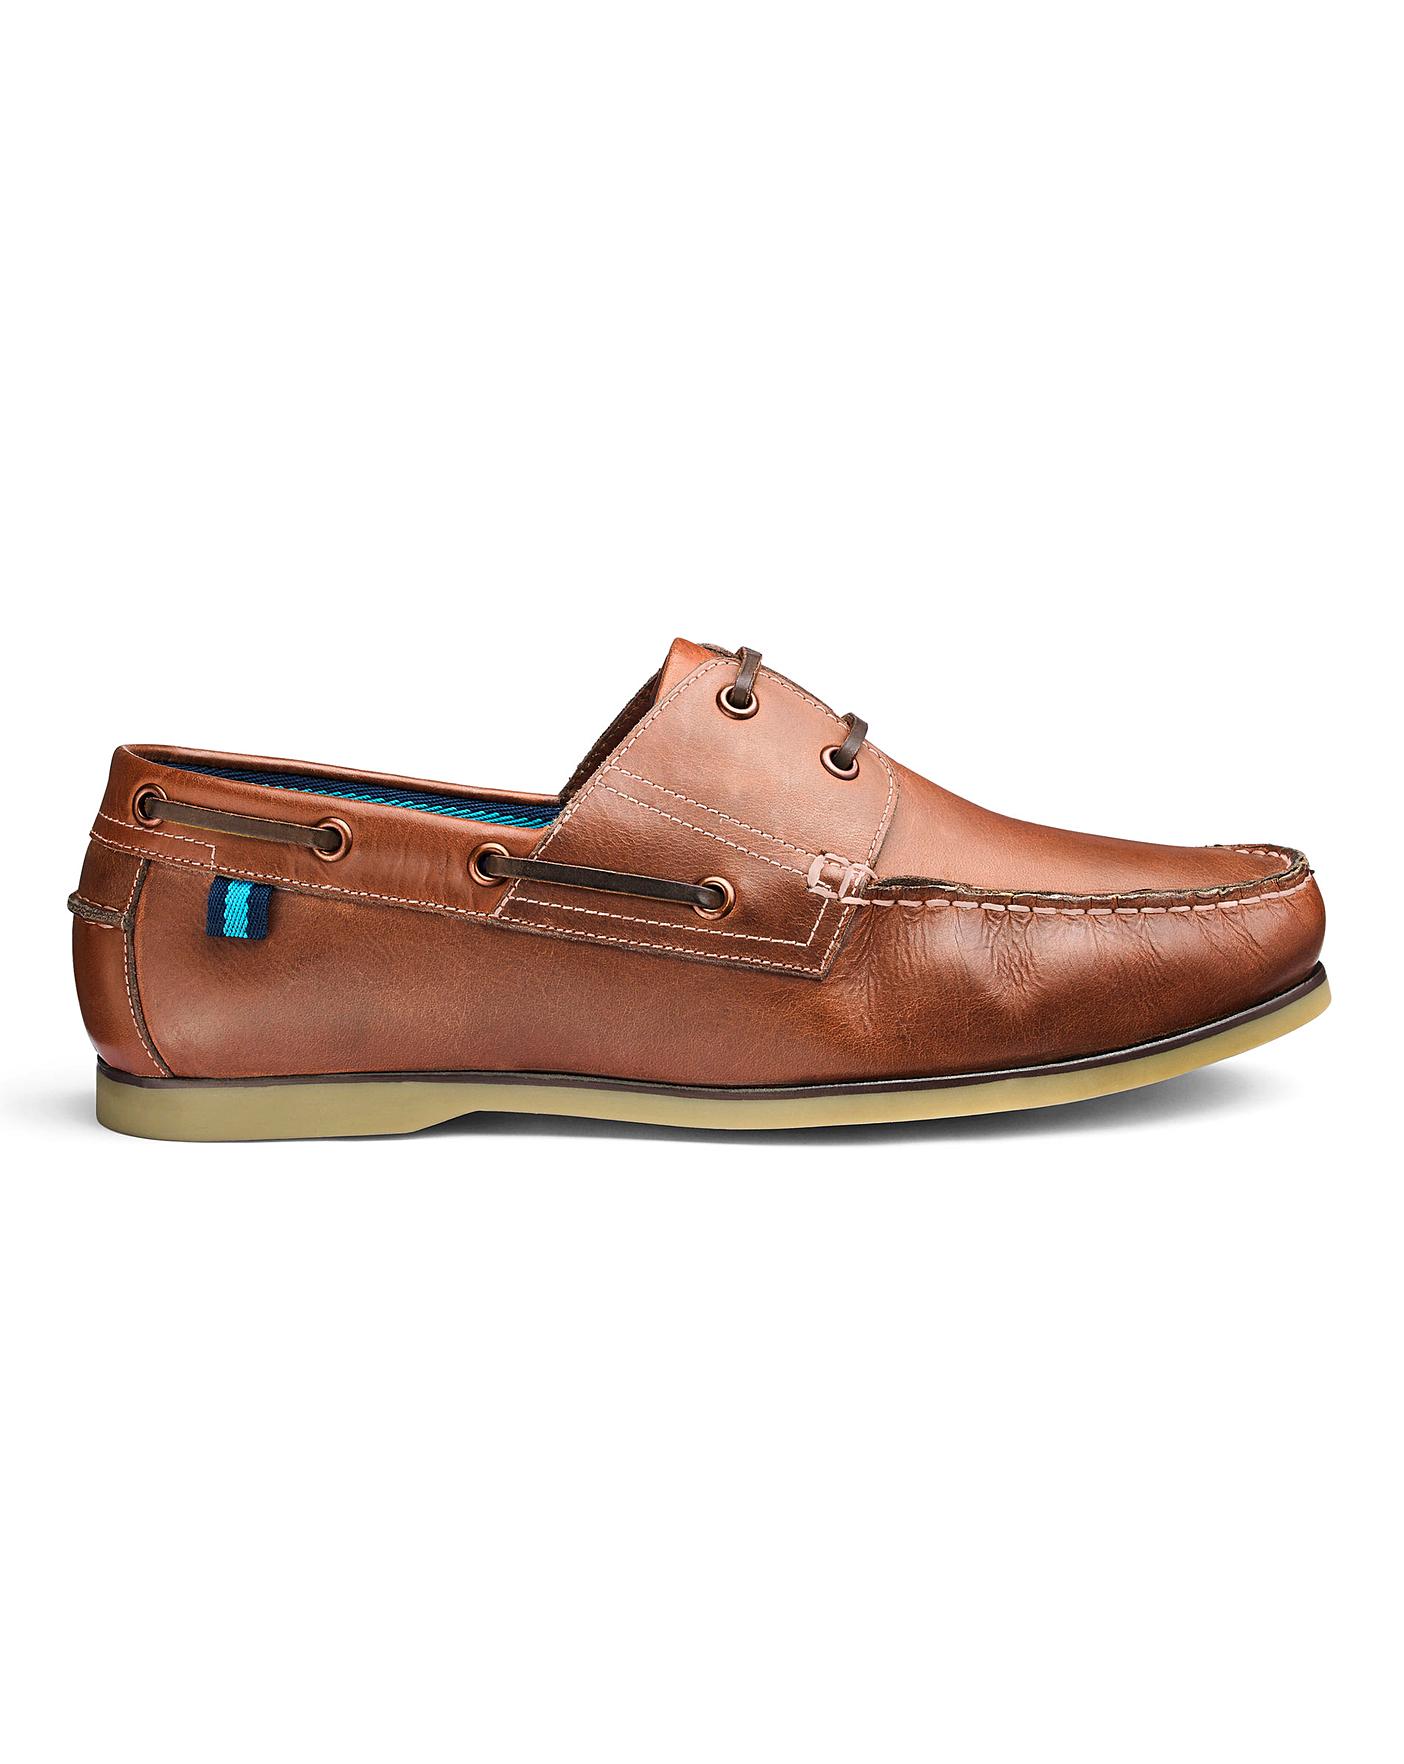 Leather Boat Shoes Wide Fit | Ambrose Wilson